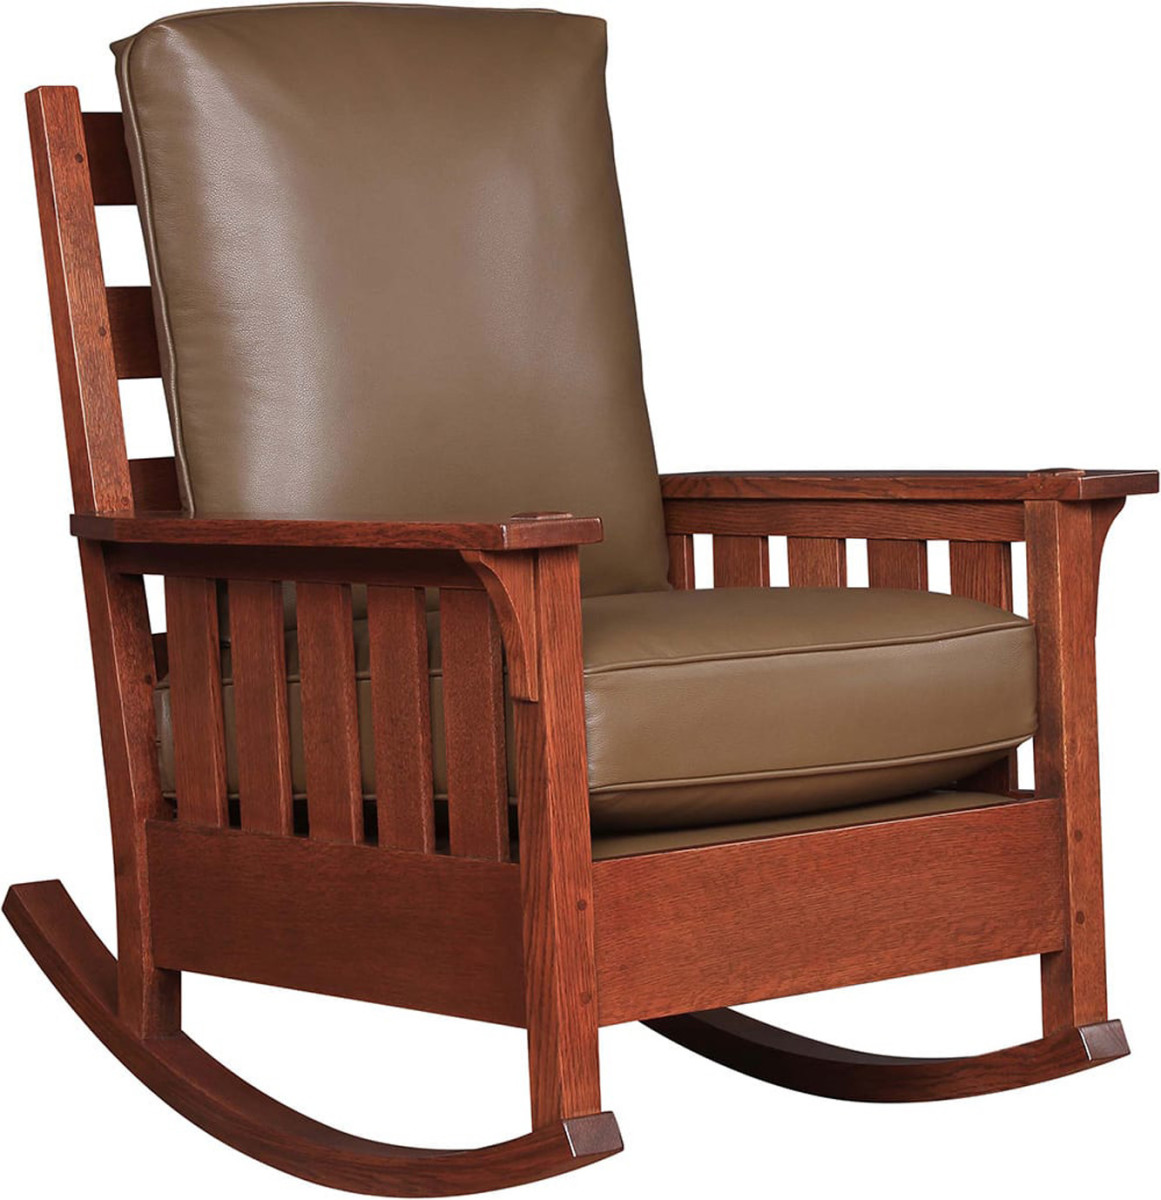 The iconic Gus rocker, based on a 1907 design.